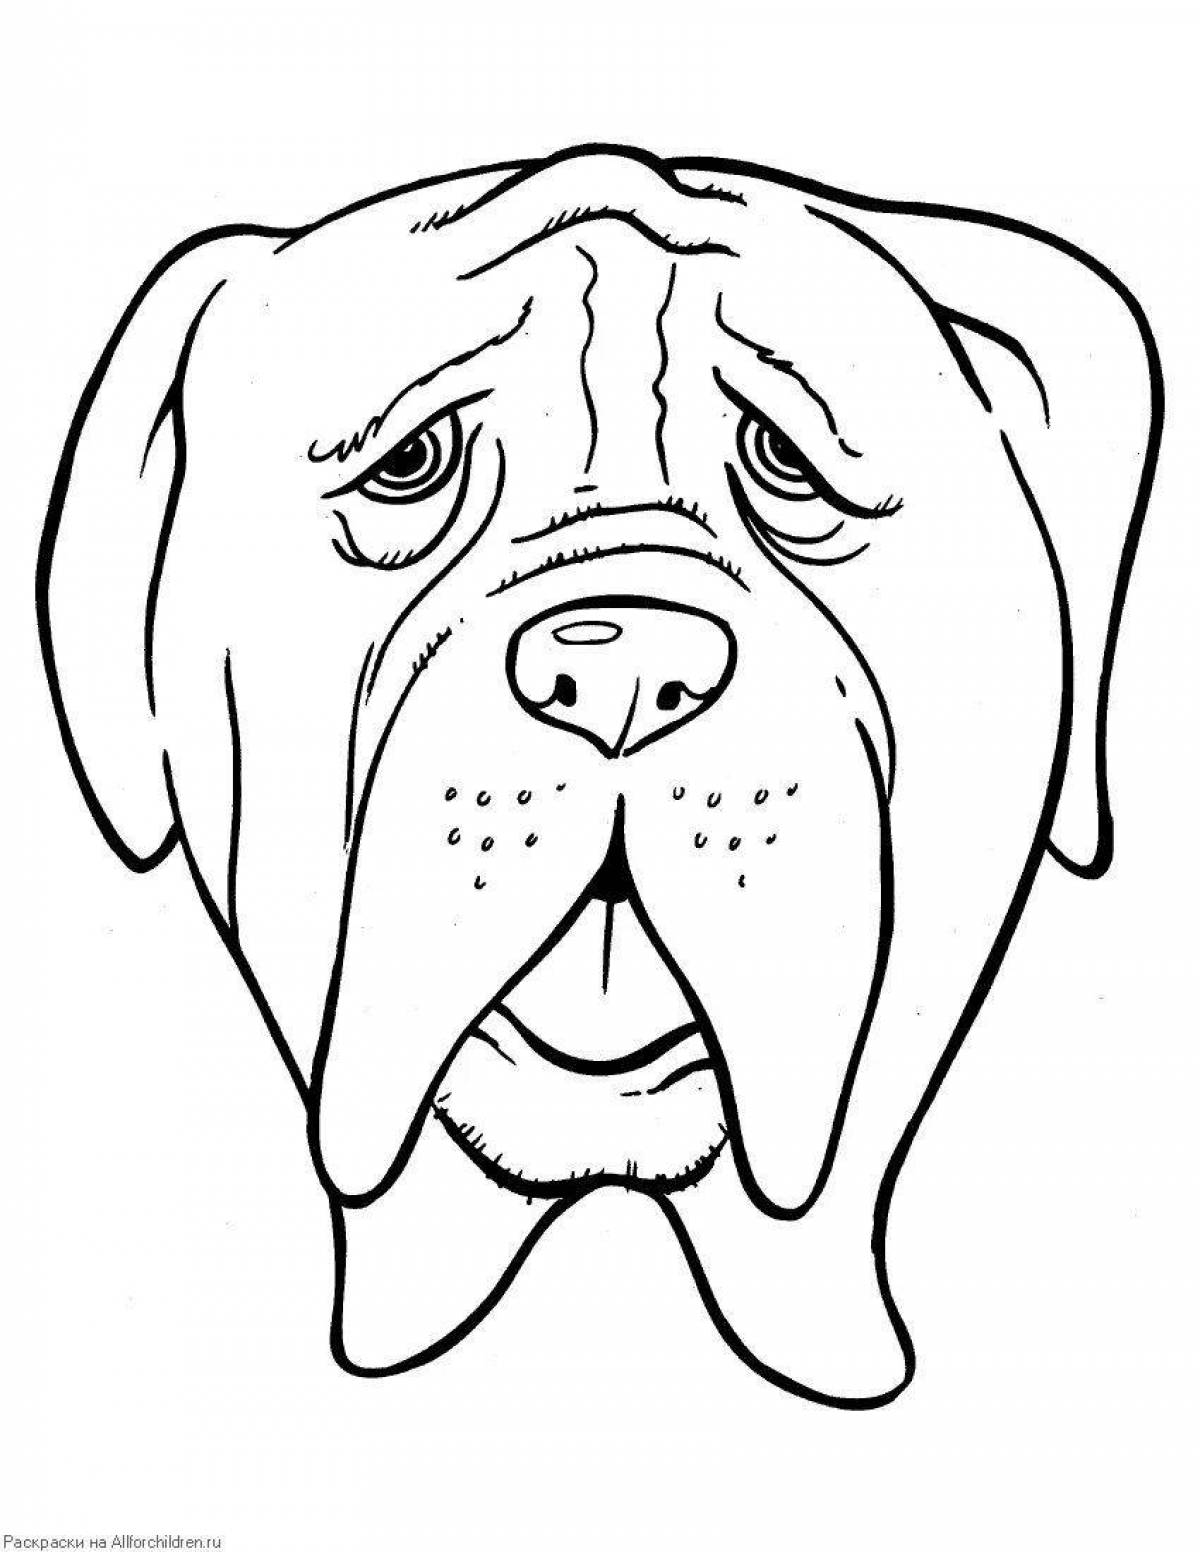 Humorous dog face coloring book